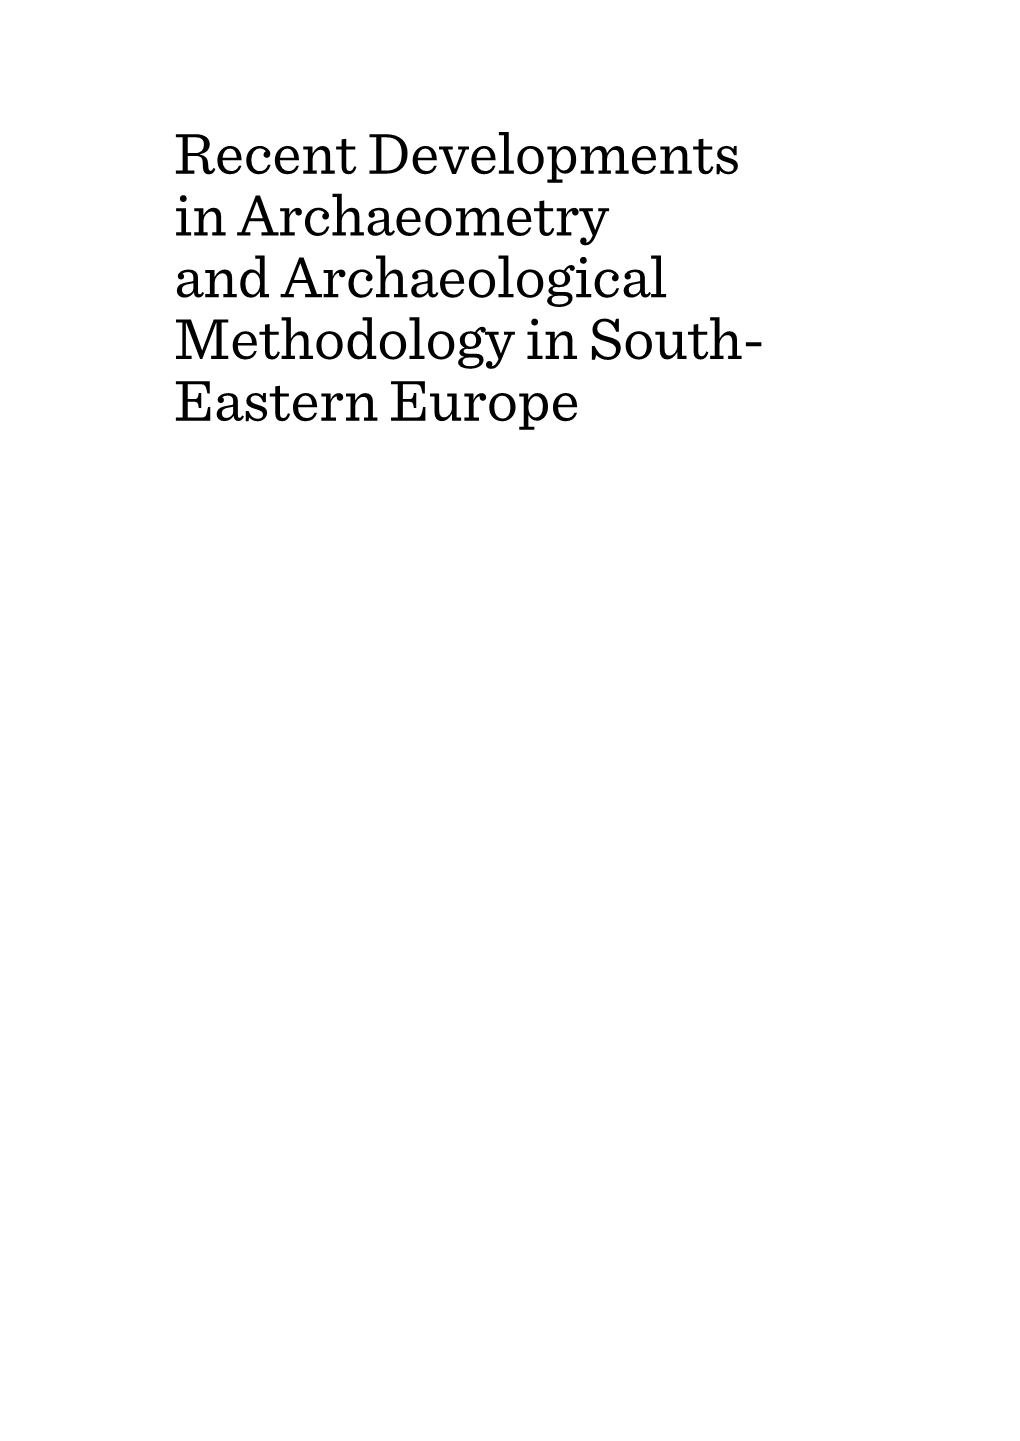 Recent Developments in Archaeometry and Archaeological Methodology in South- Eastern Europe